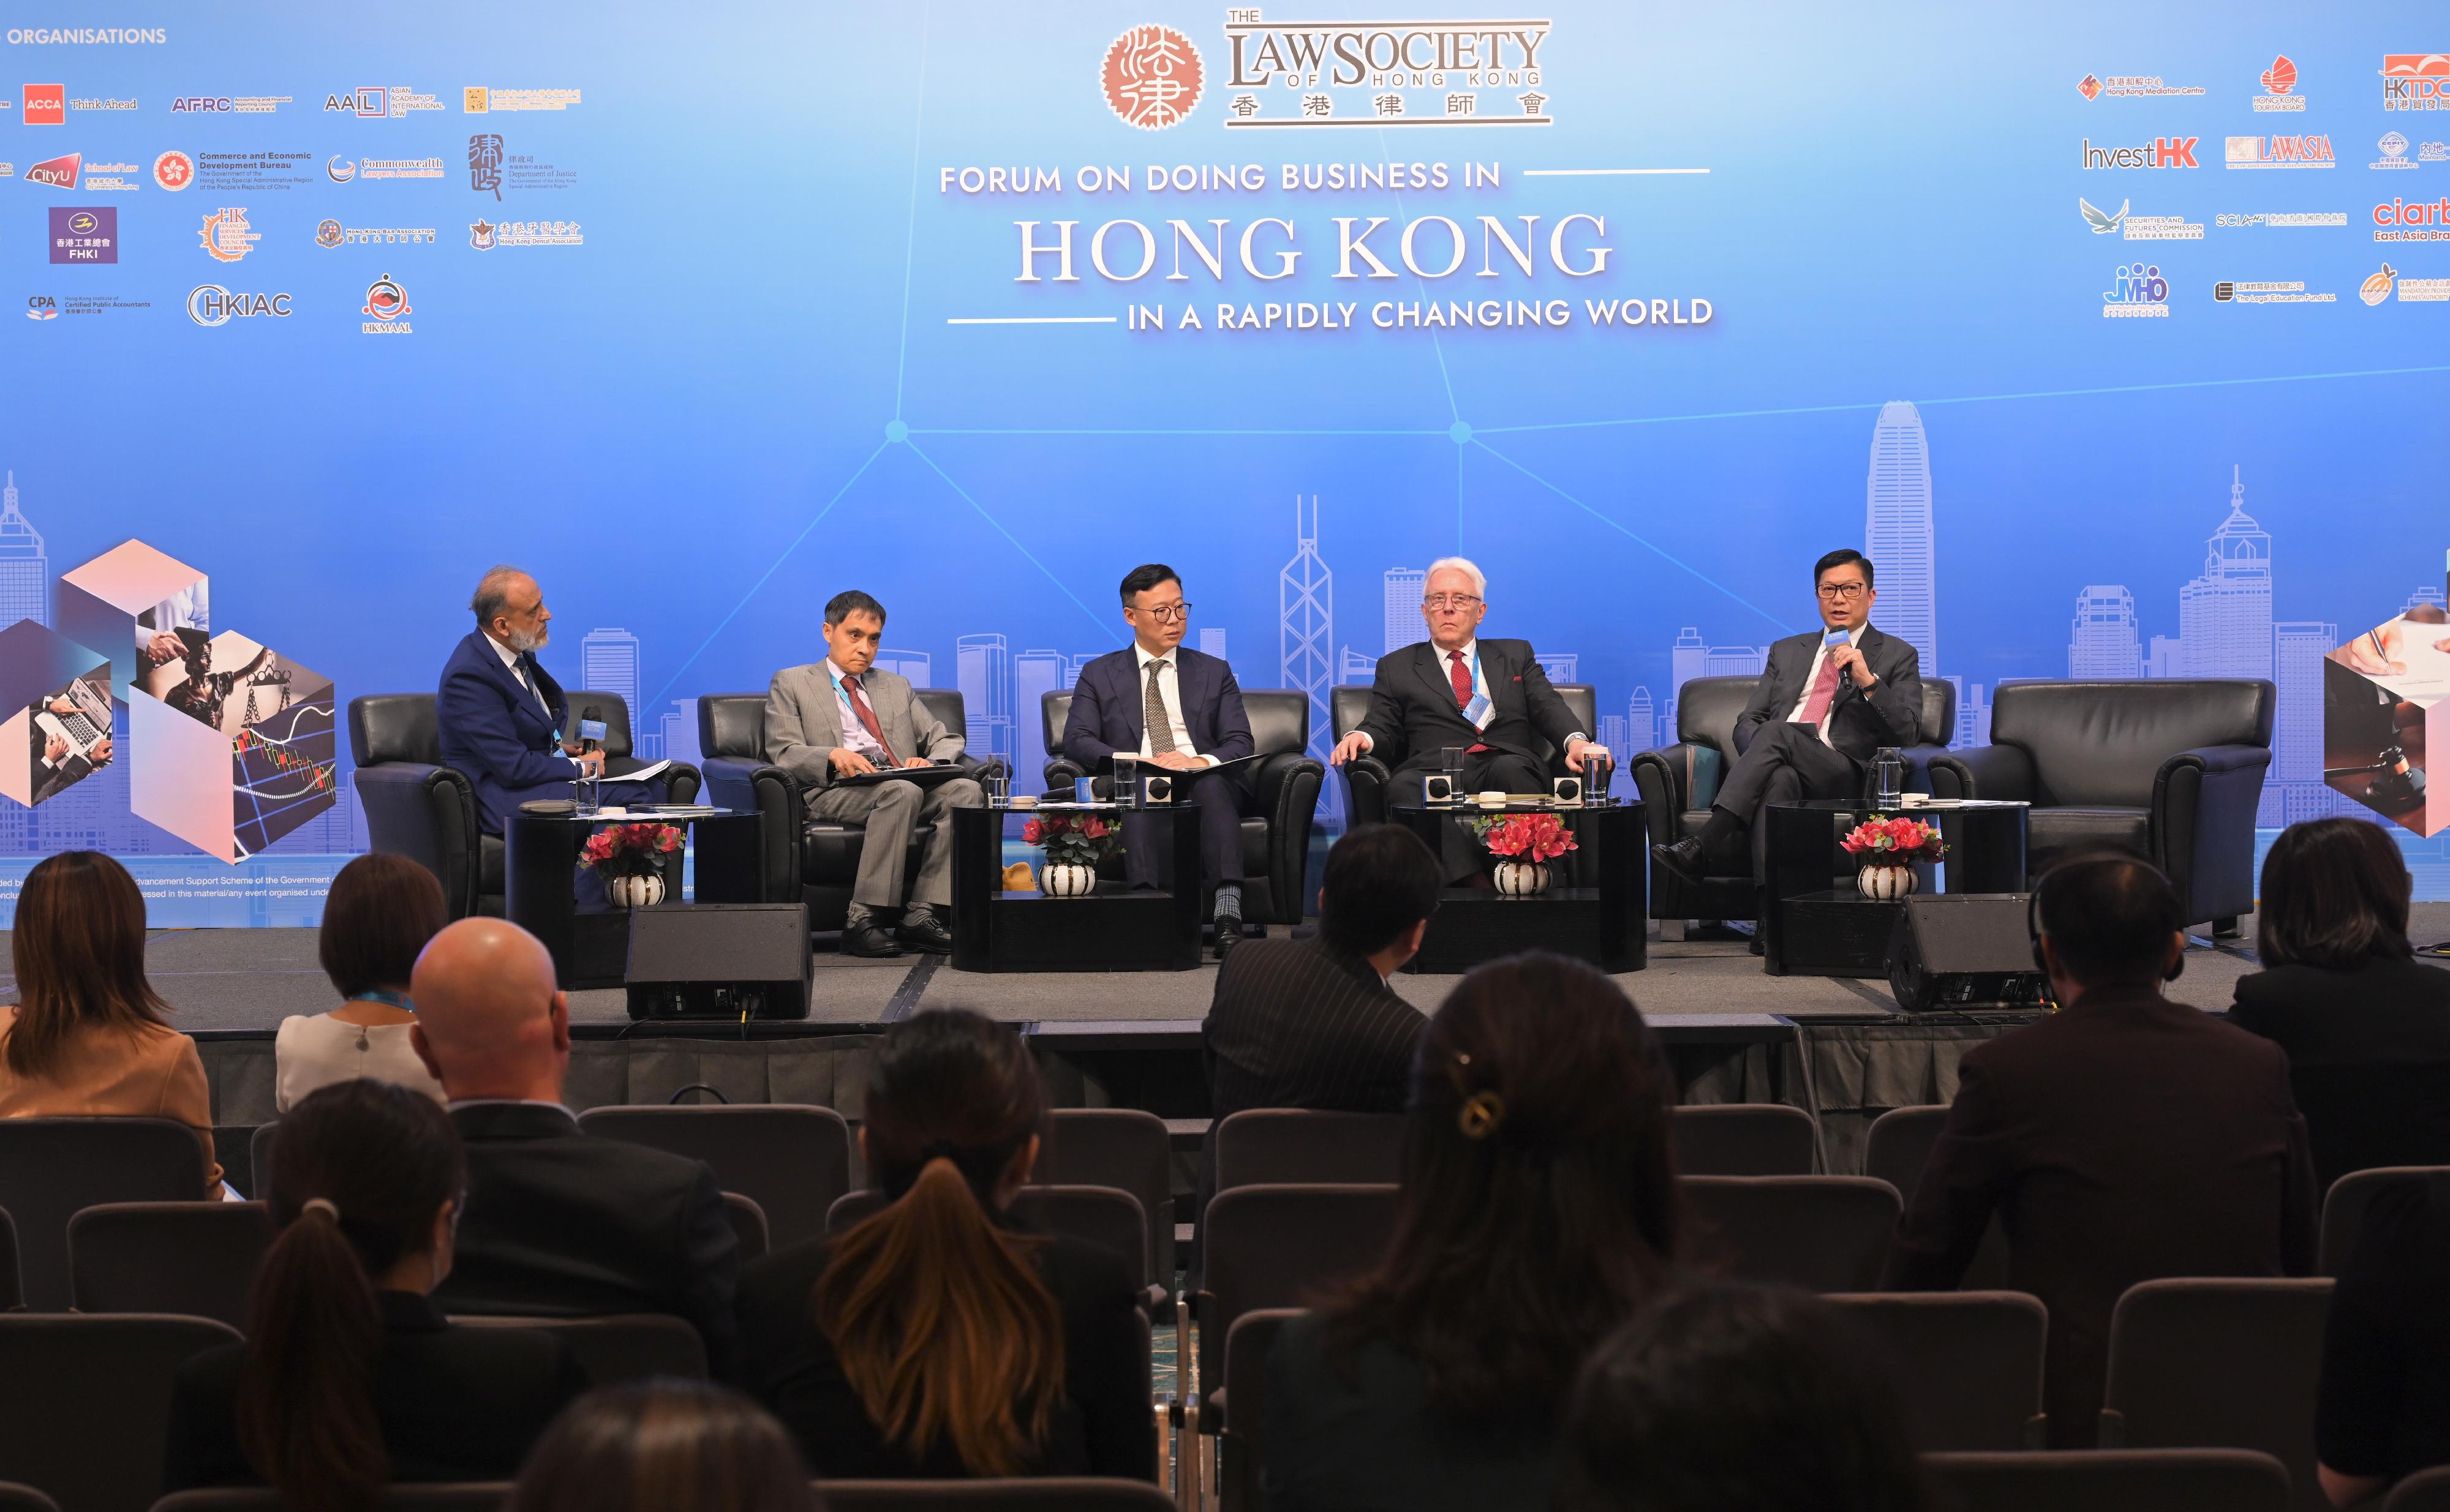 The Secretary for Security, Mr Tang Ping-keung (first right), speaks at a panel discussion at the Law Society of Hong Kong's Forum on Doing Business in Hong Kong in a Rapidly Changing World today (July 11).